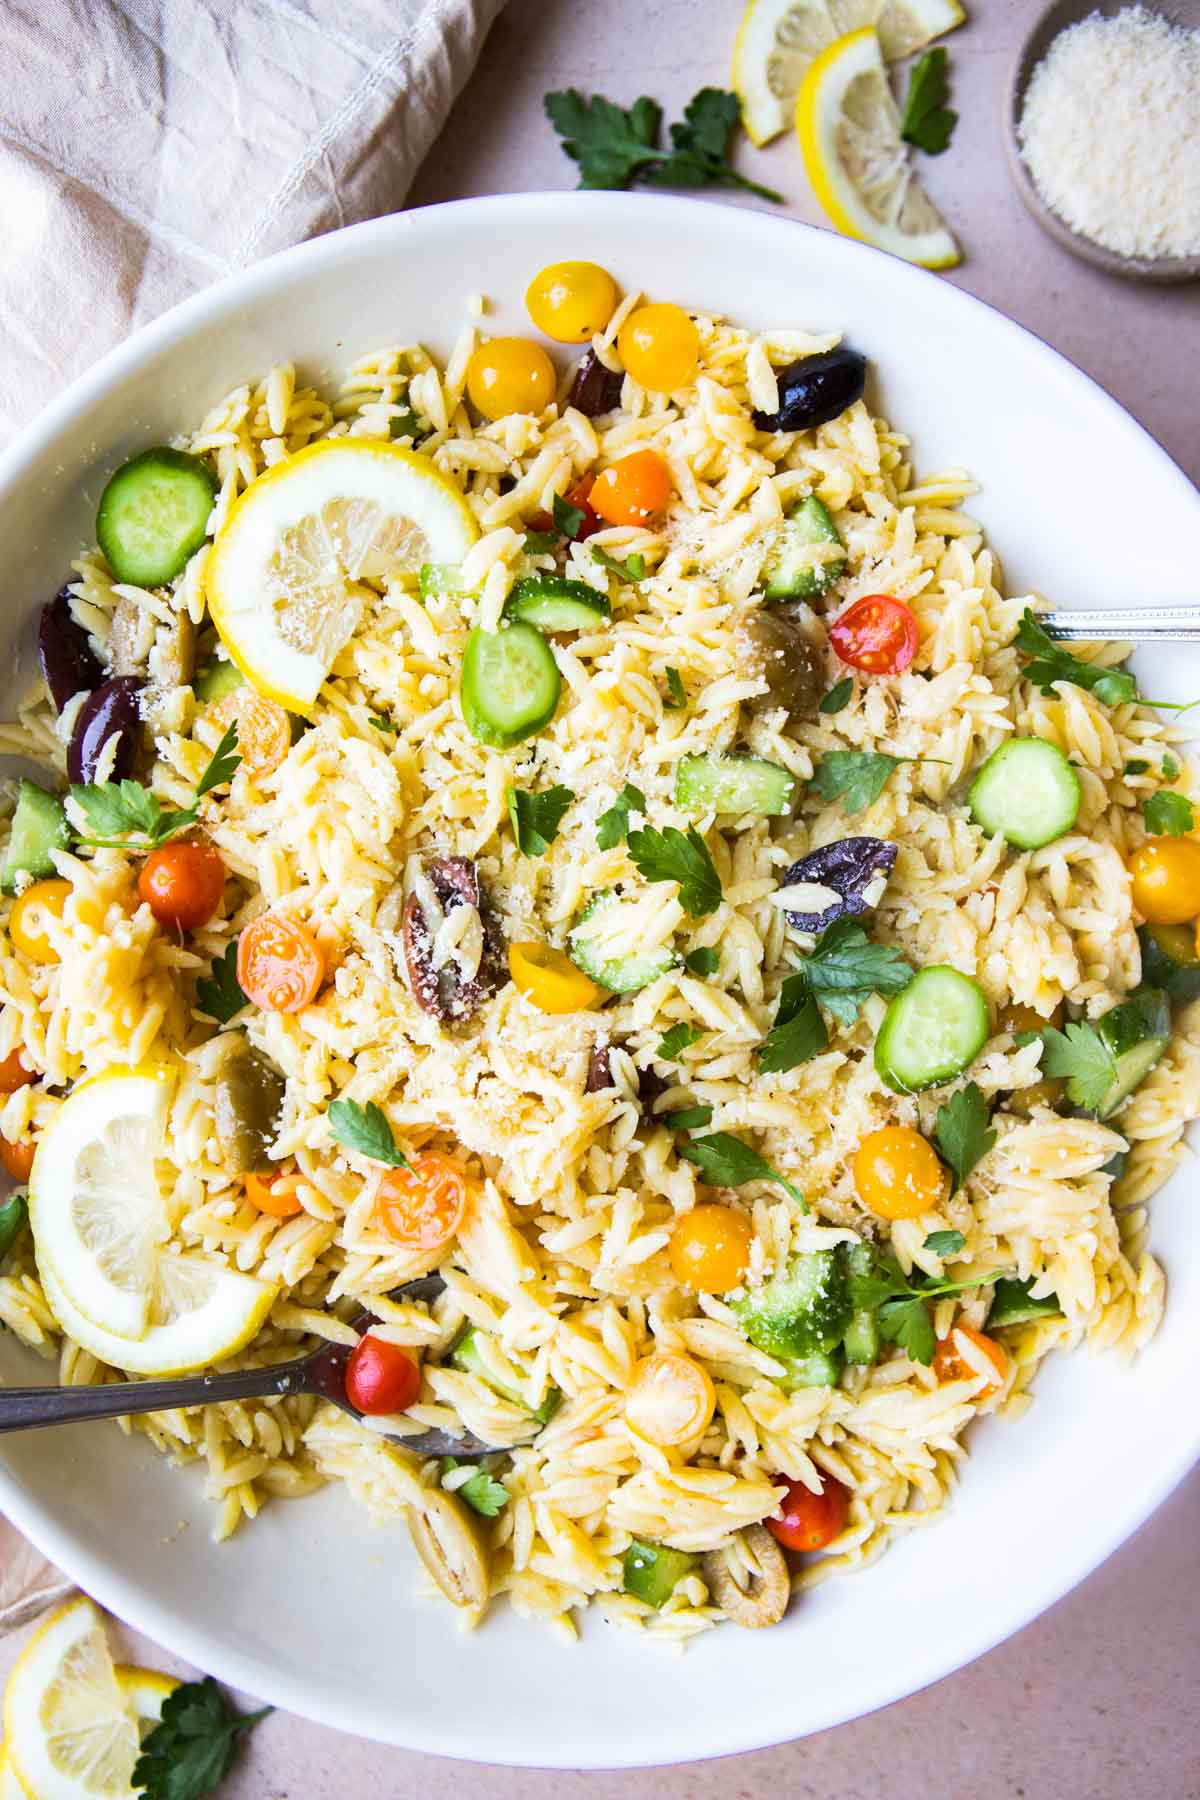 Top view of a large bowl filled with Lemon Orzo Salad and lemon slices garnished on the side.